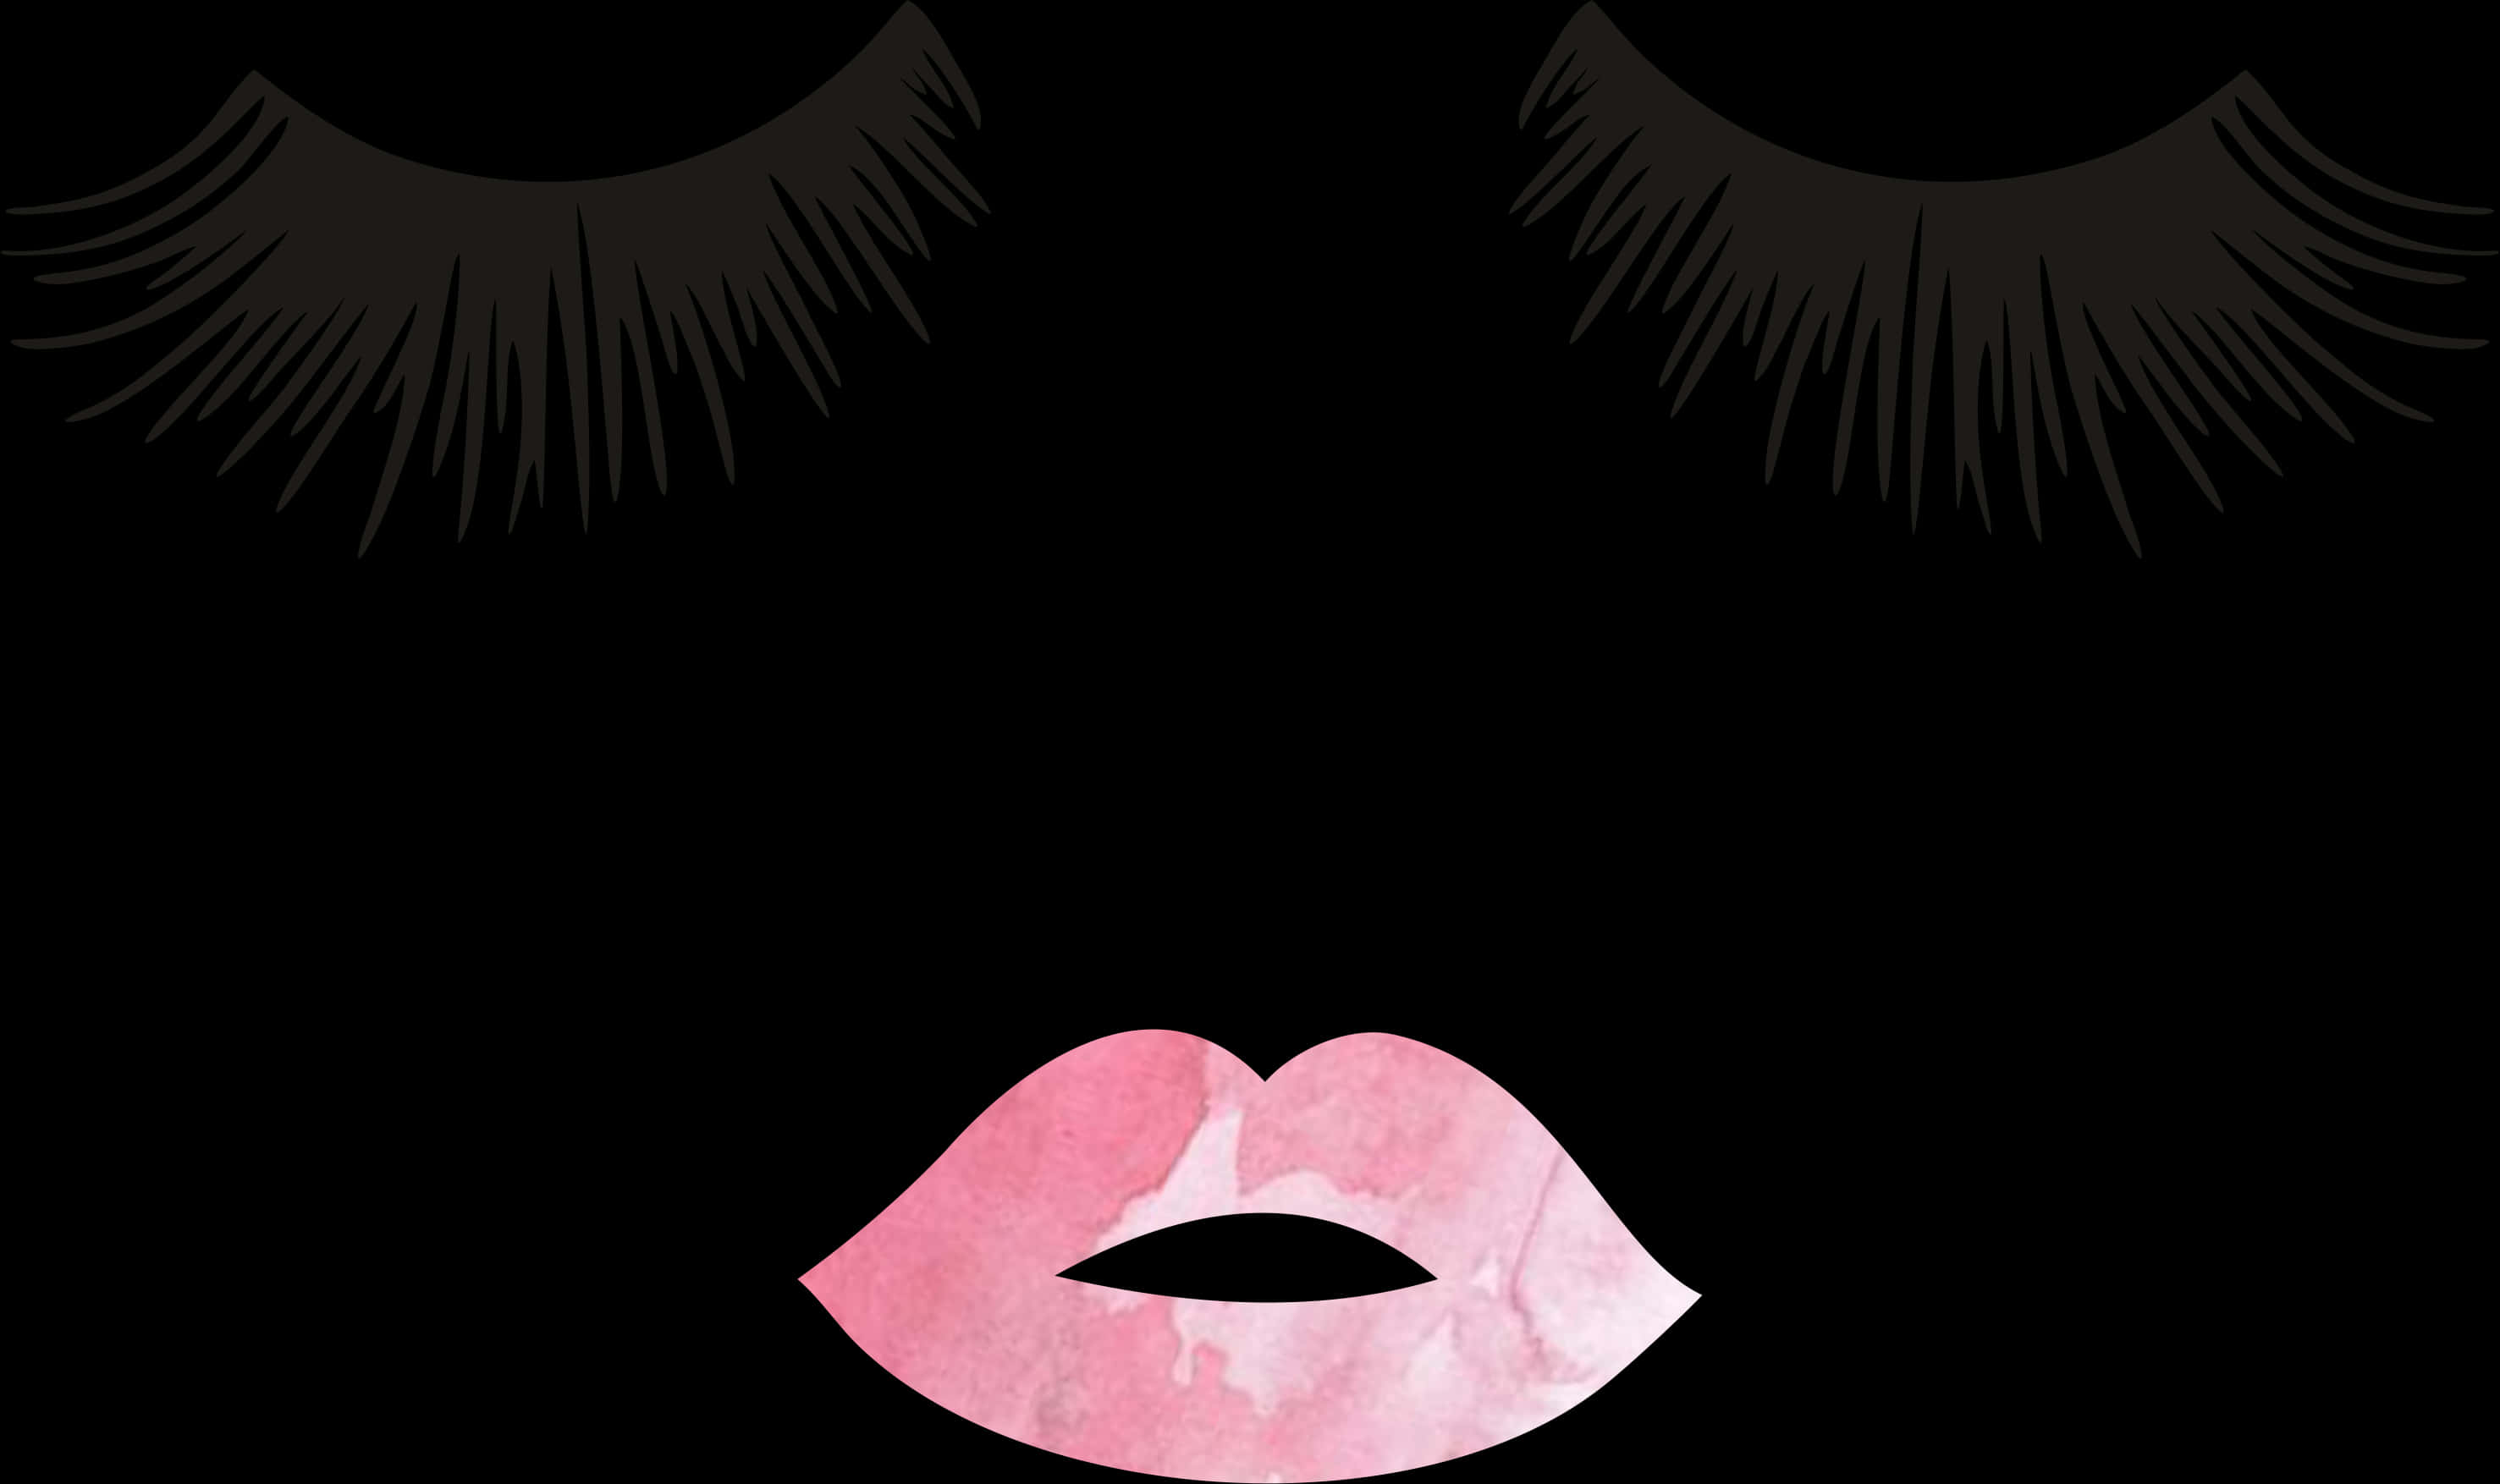 A Lips And Eyelashes On A Black Background